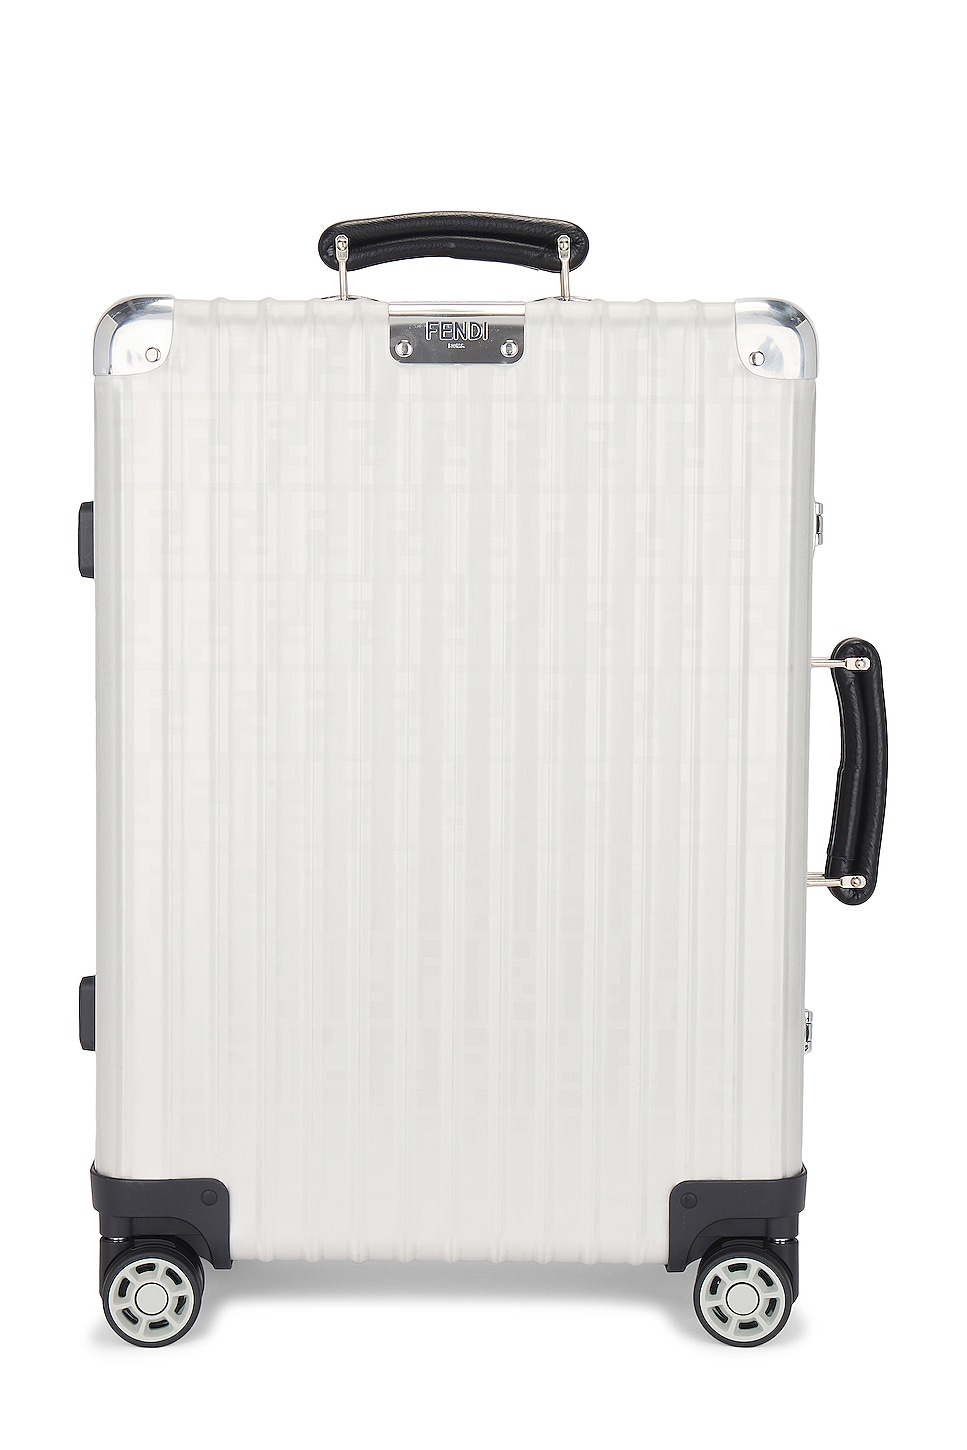 Fendi Partners With Rimowa Exclusive Suitcase